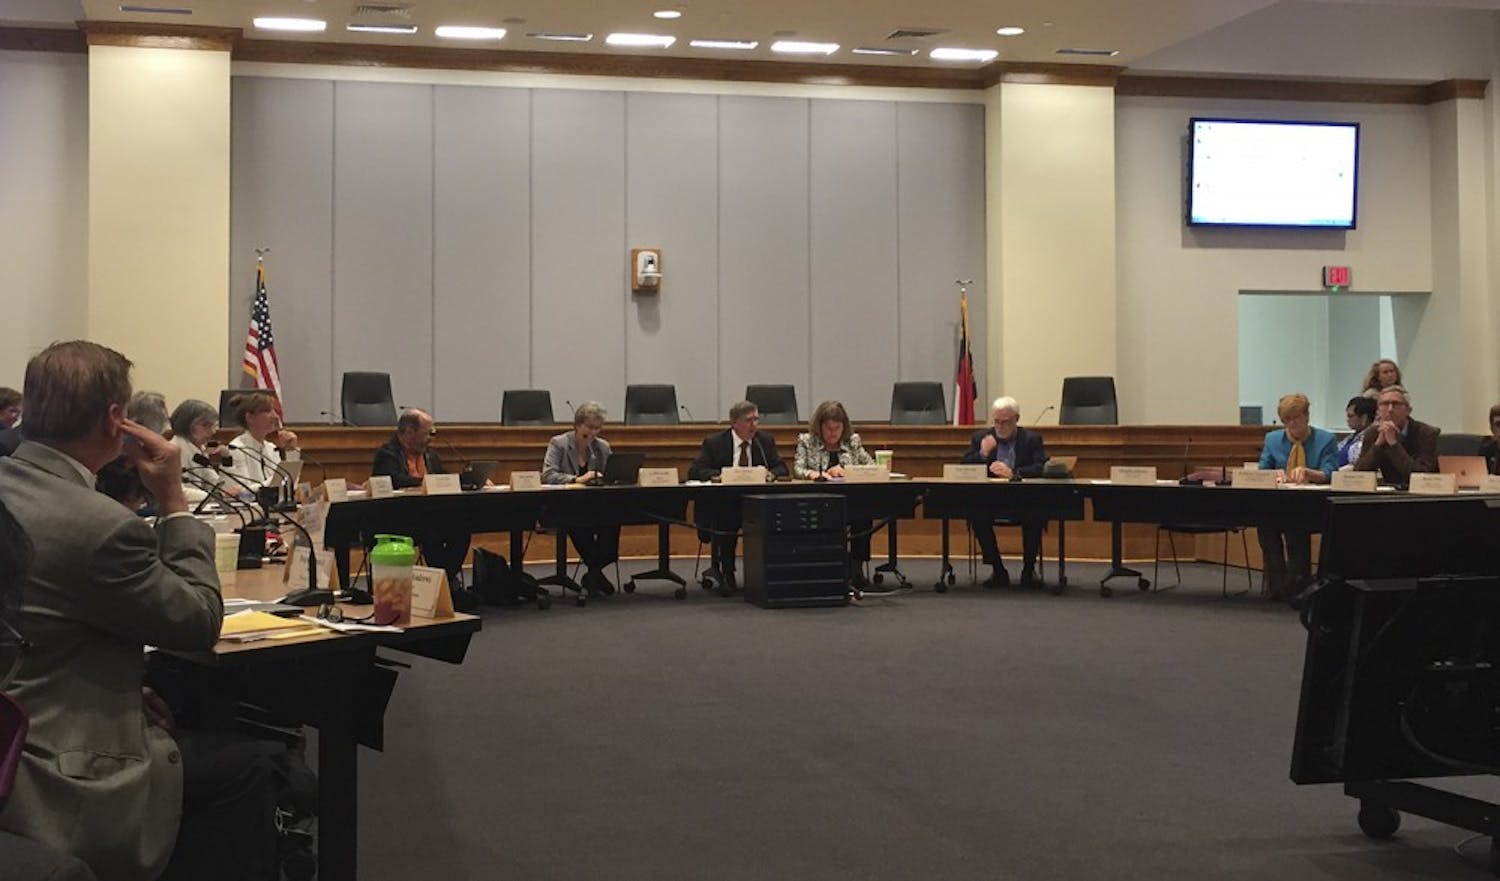 The Orange County board of commissioners, chapel hill town council and the Carrboro board of aldermen met in Hillsborough on Thursday.